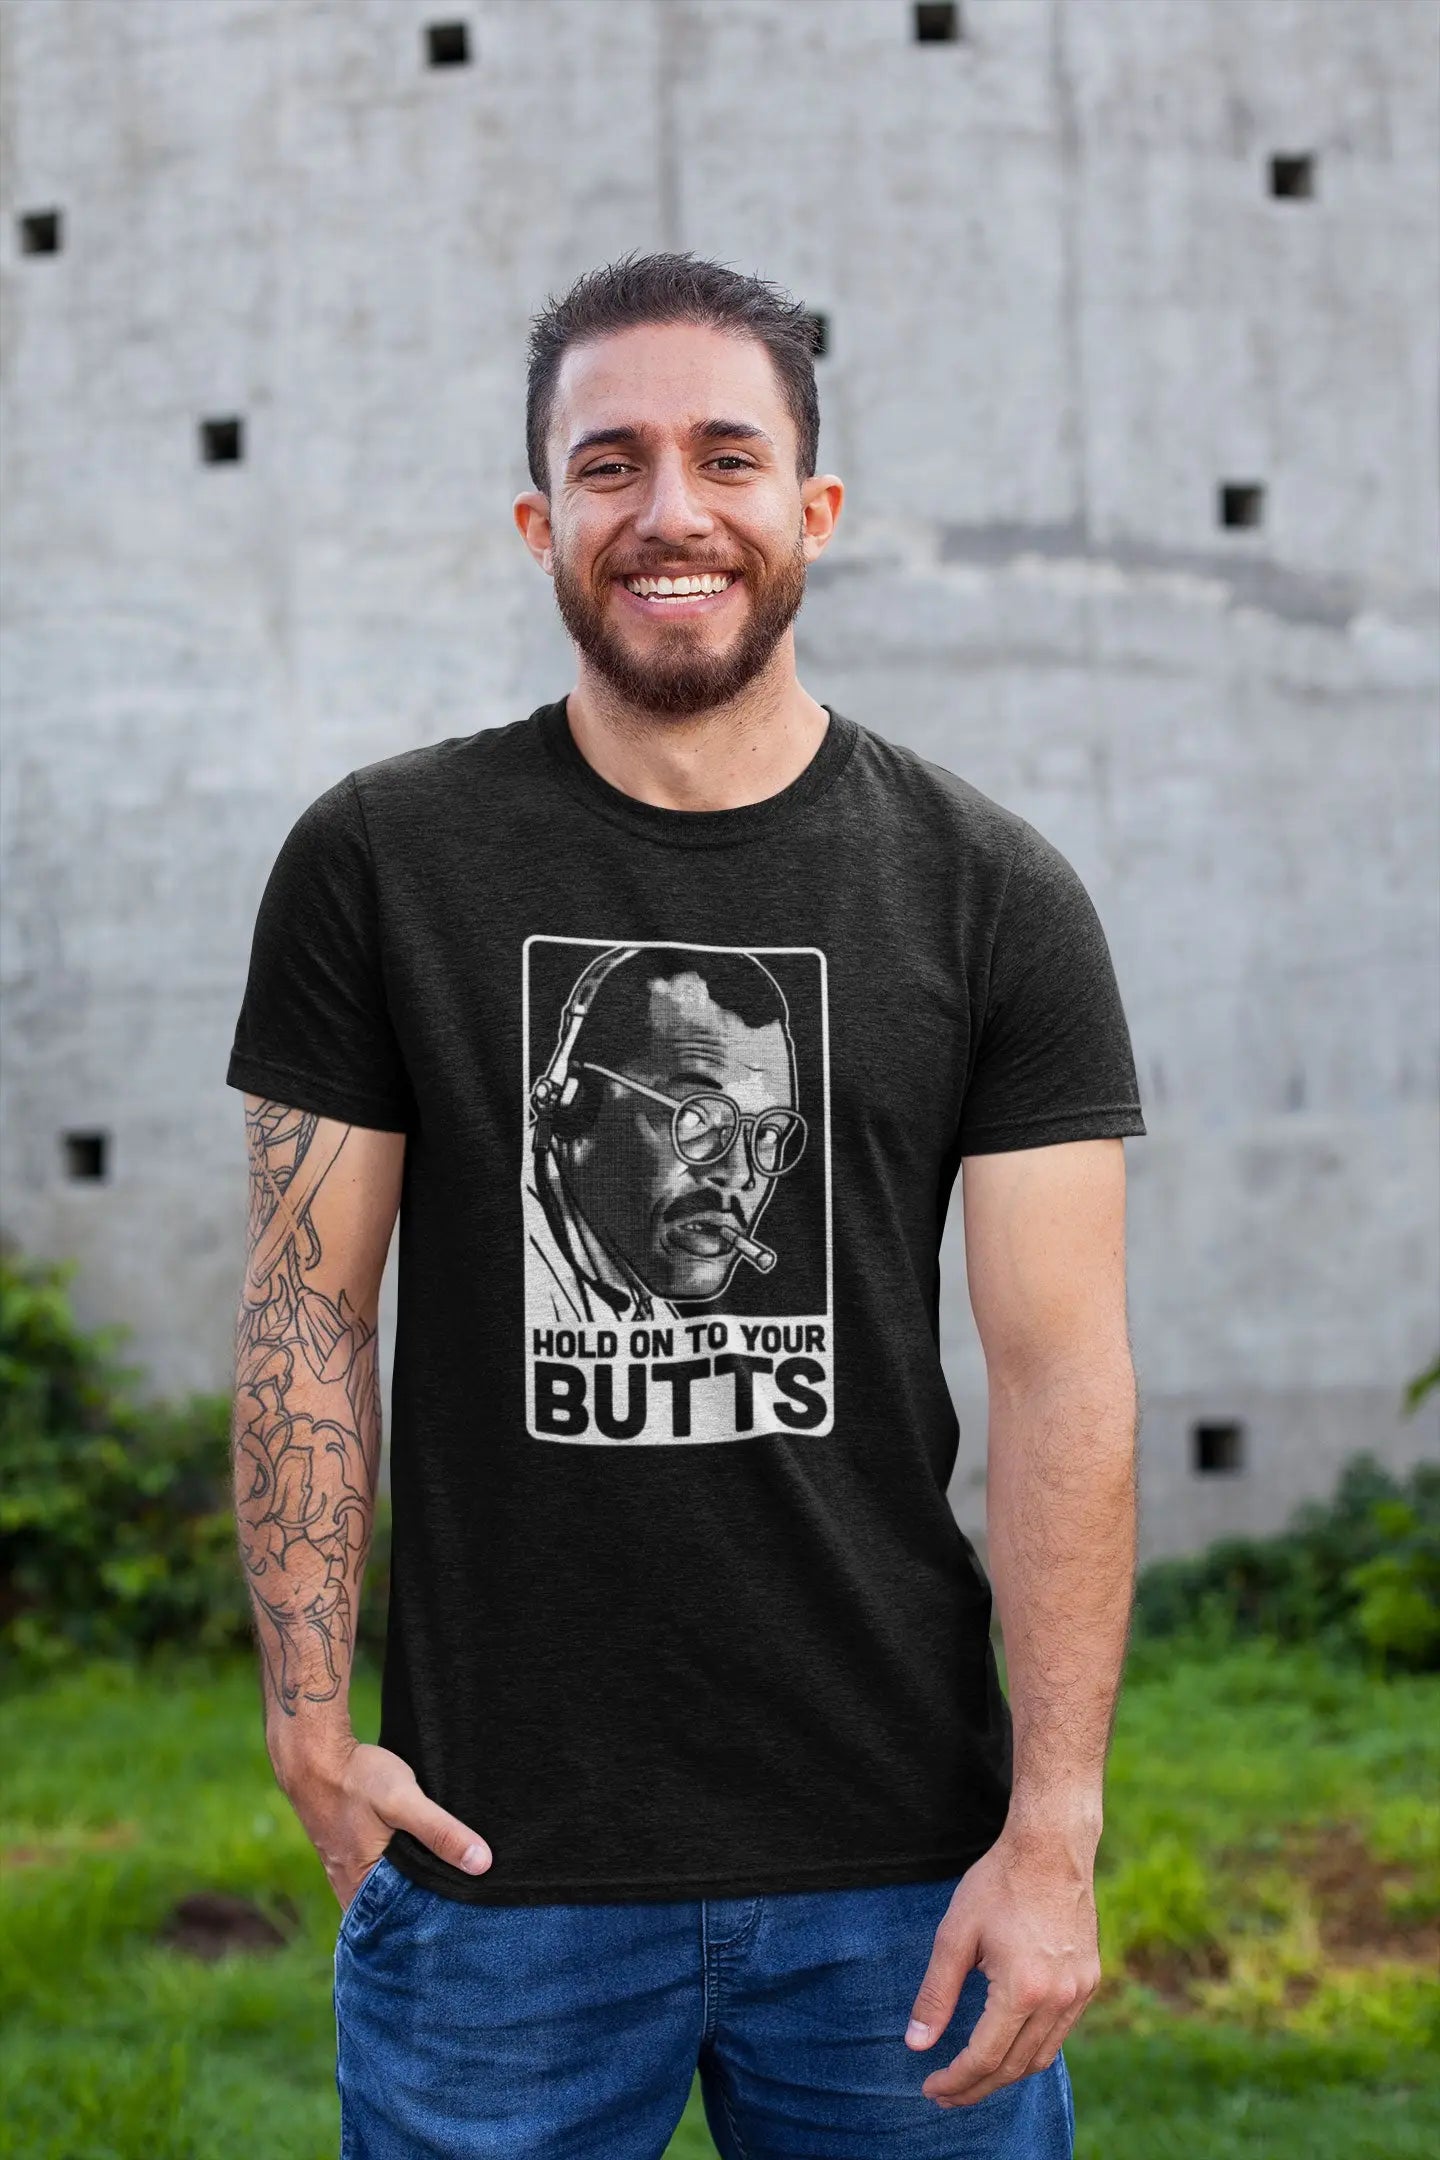 Hold On To Your Butts Tshirt - Donkey Tees